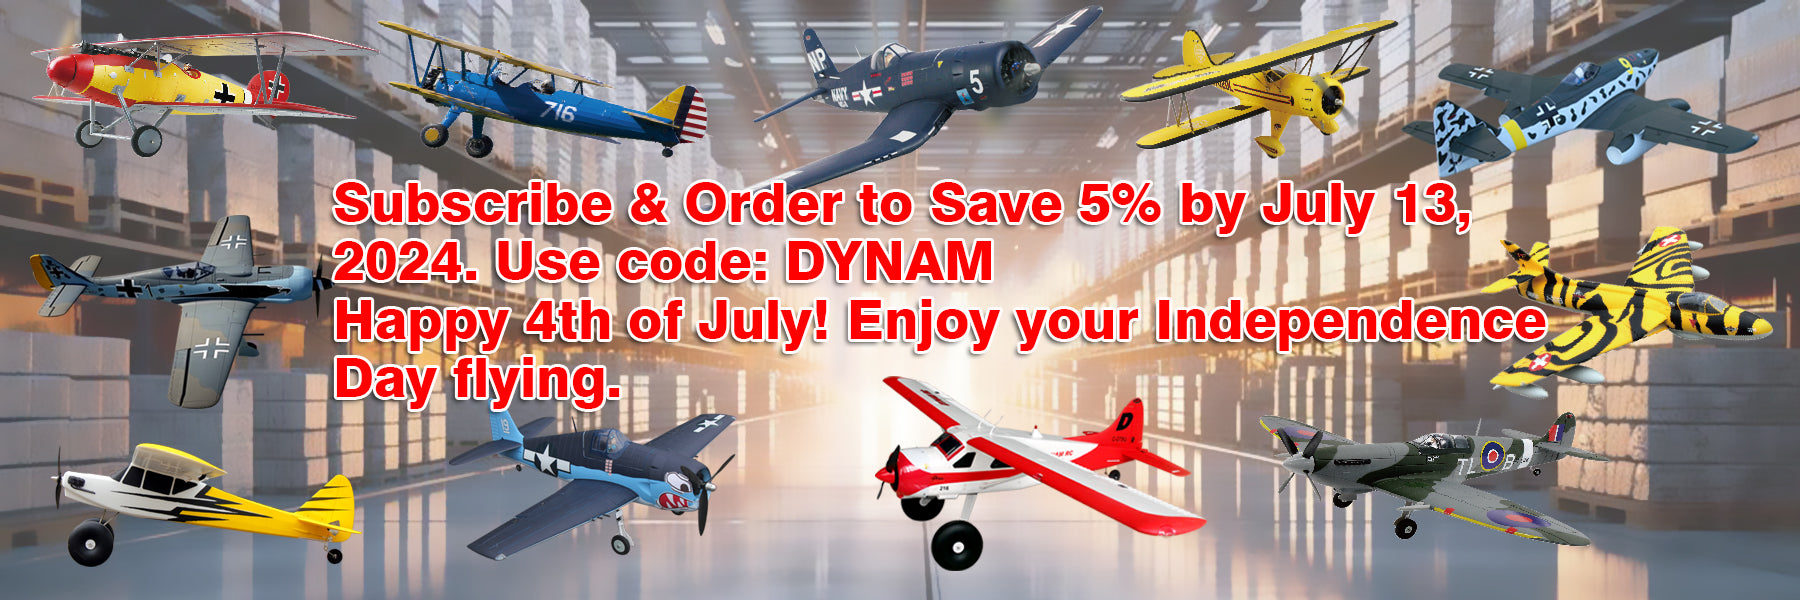 Dynam-Airplanes-In-Stock-at-the-USA-Australia-Canada-Warehouse-Independent-Day-Banner